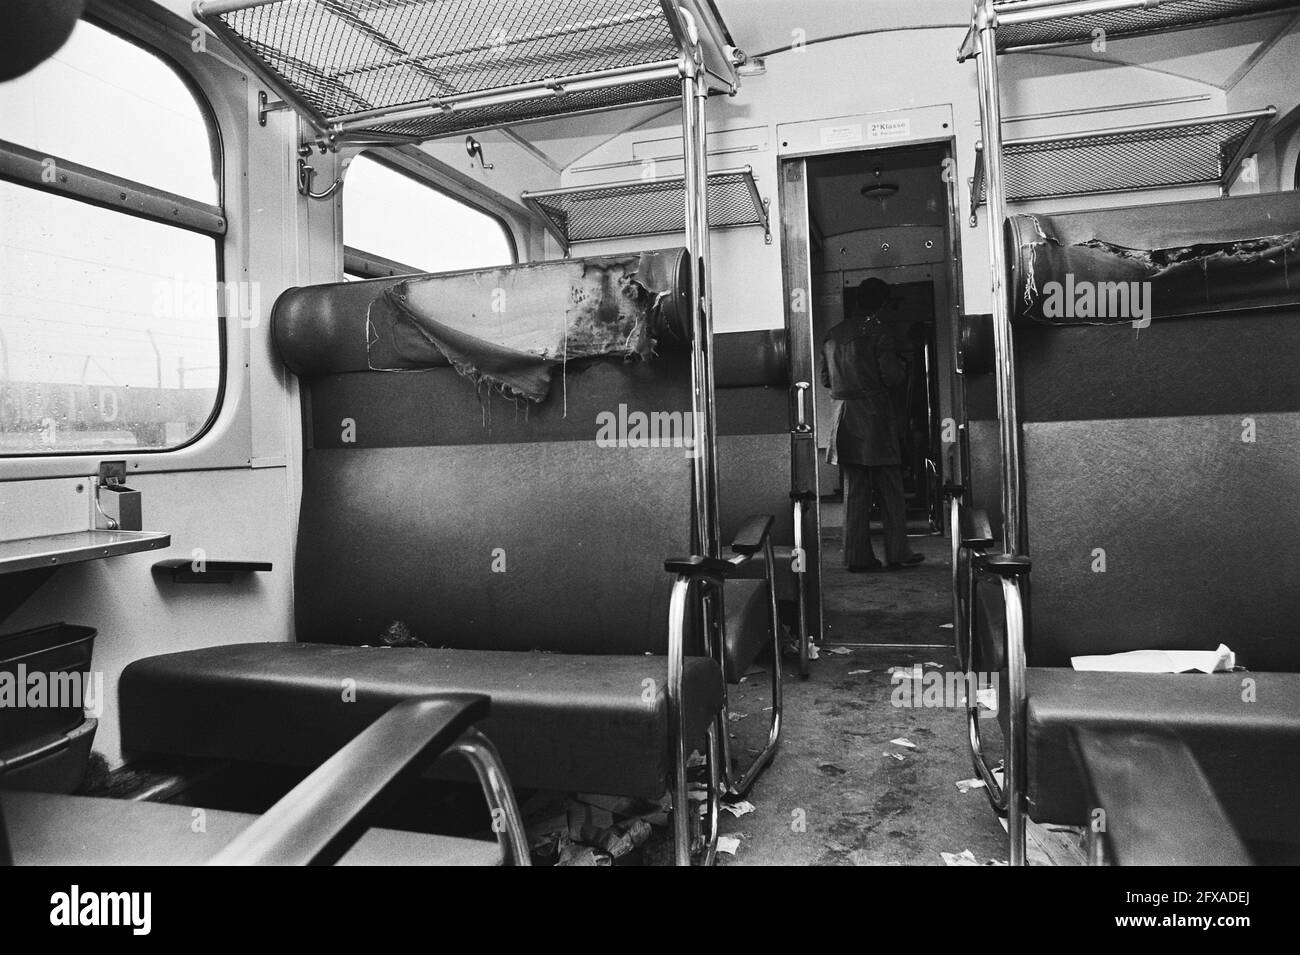 Trains vandalized by soccer supporters; one of the destroyed compartments, January 10, 1977, SUPPORTERS, sports, soccer, The Netherlands, 20th century press agency photo, news to remember, documentary, historic photography 1945-1990, visual stories, human history of the Twentieth Century, capturing moments in time Stock Photo